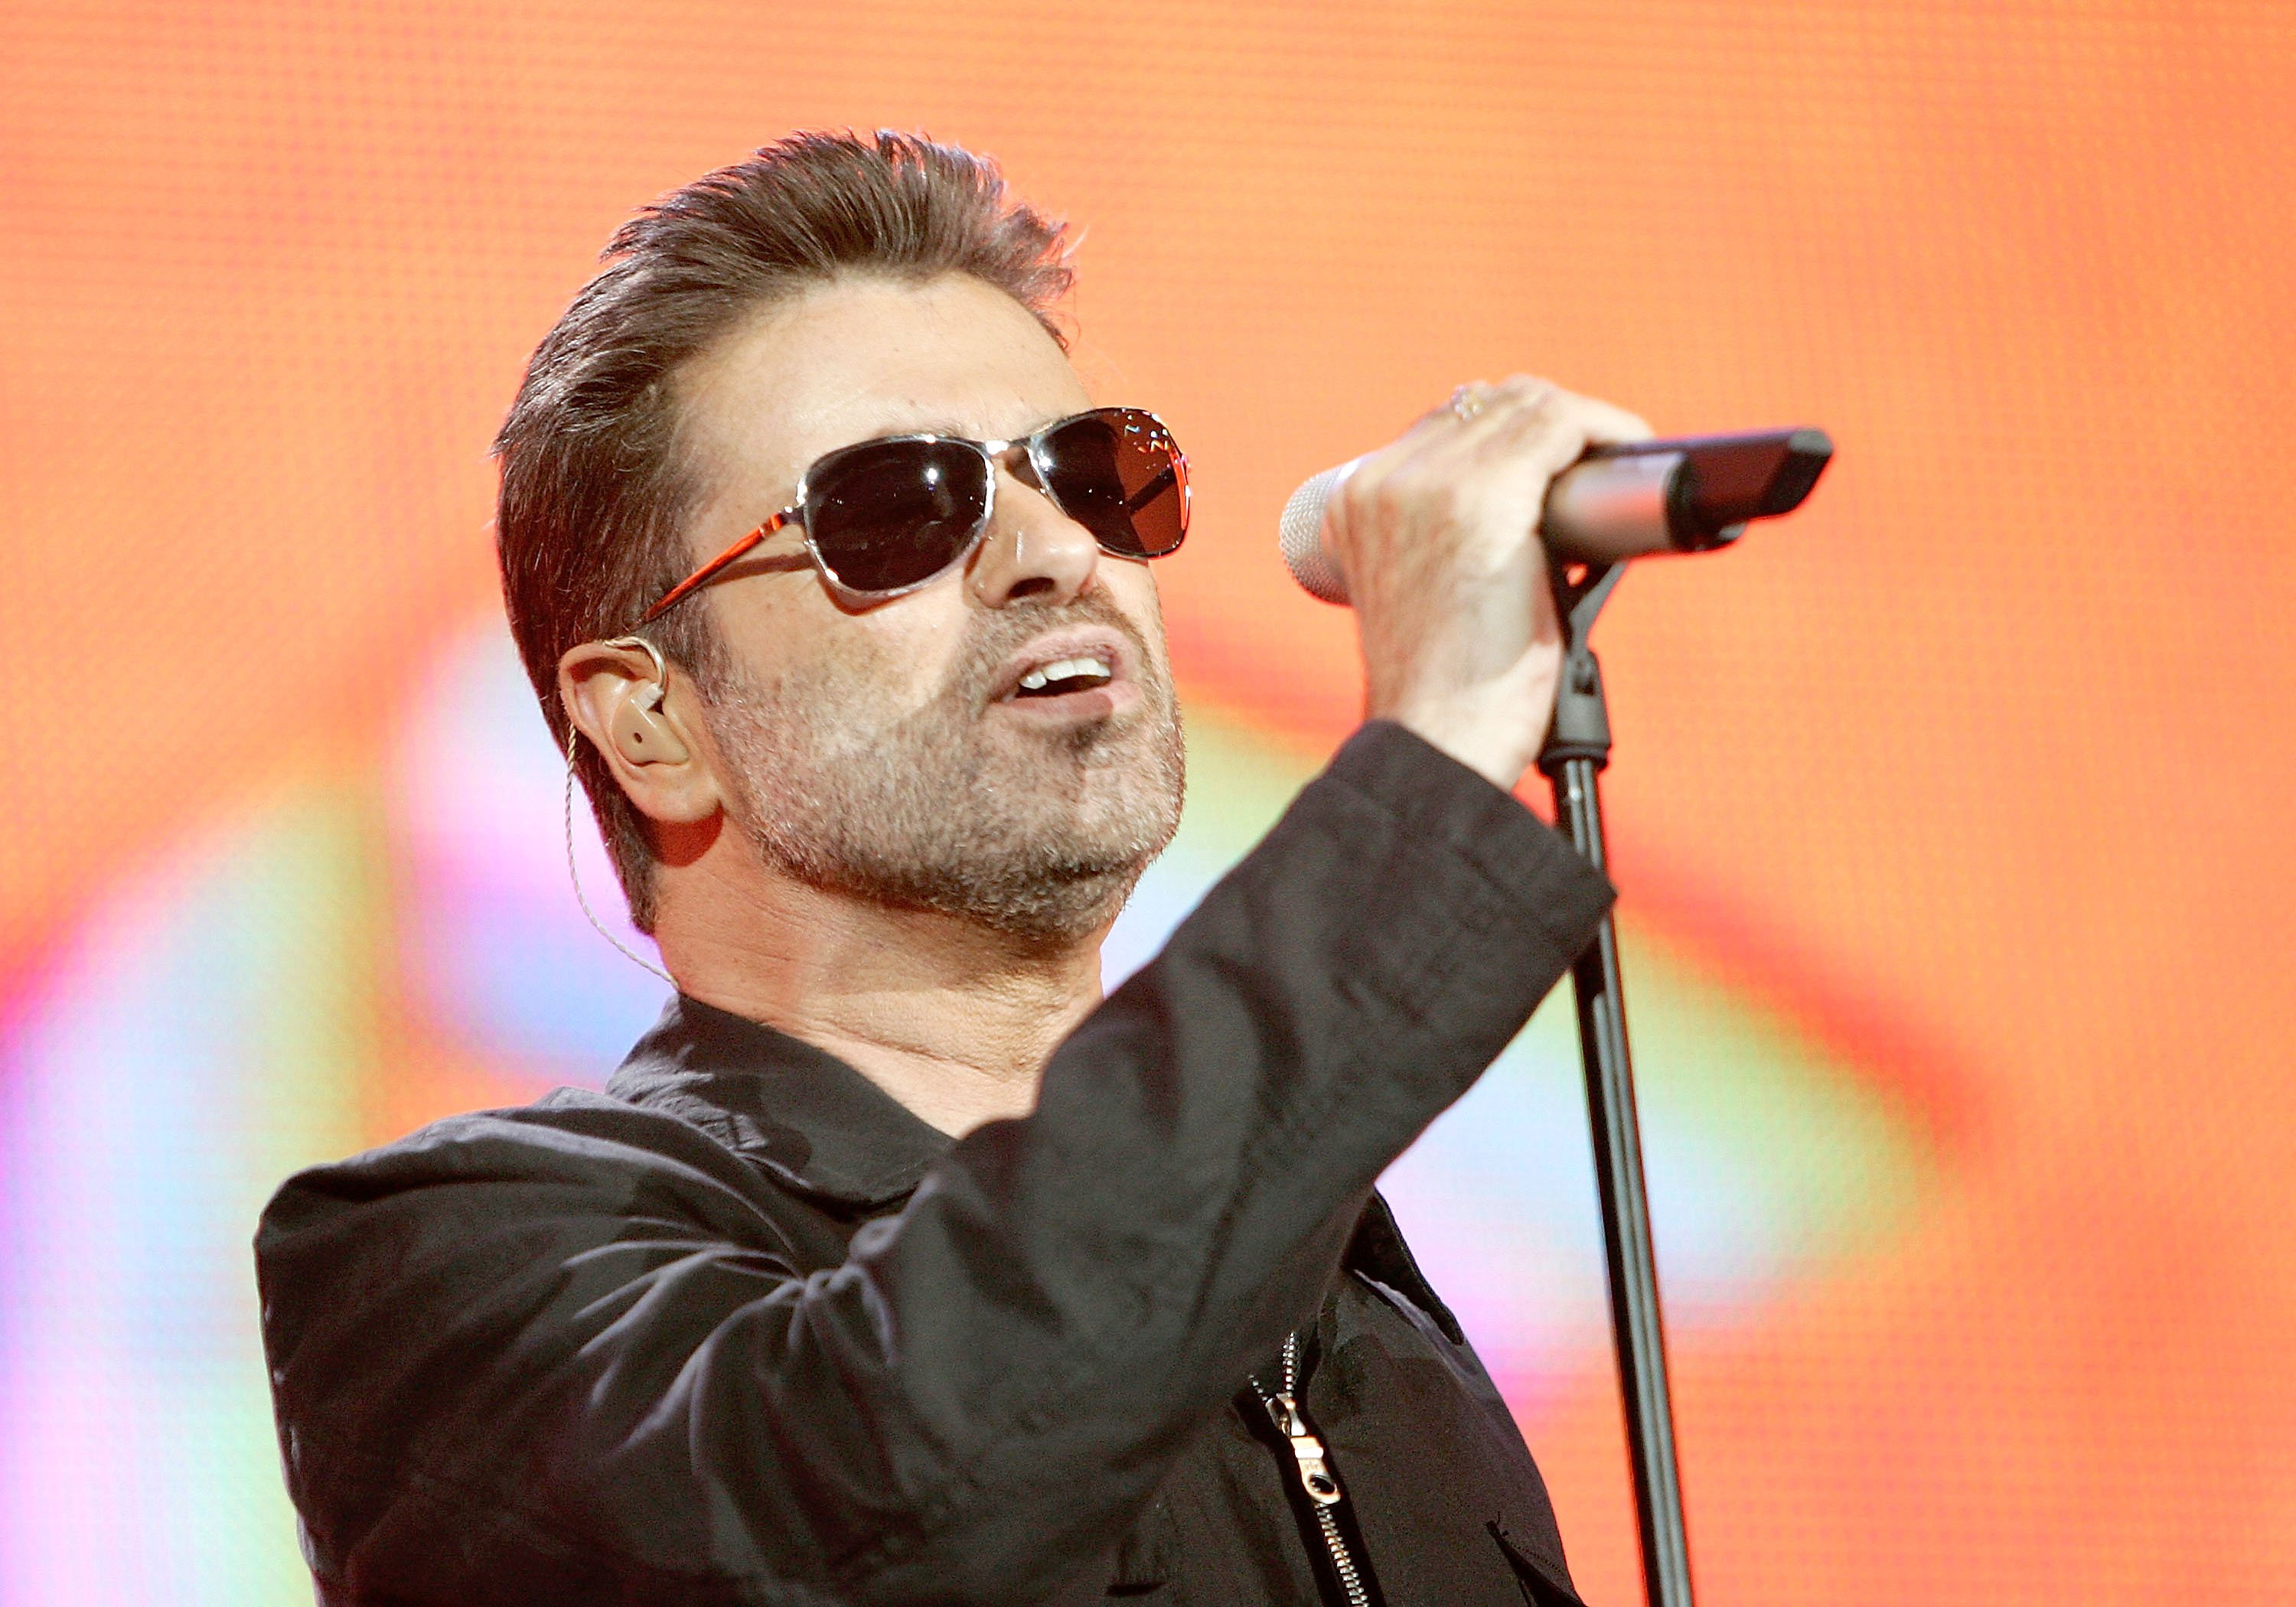 Singer George Michael performing on stage at Live 8 London